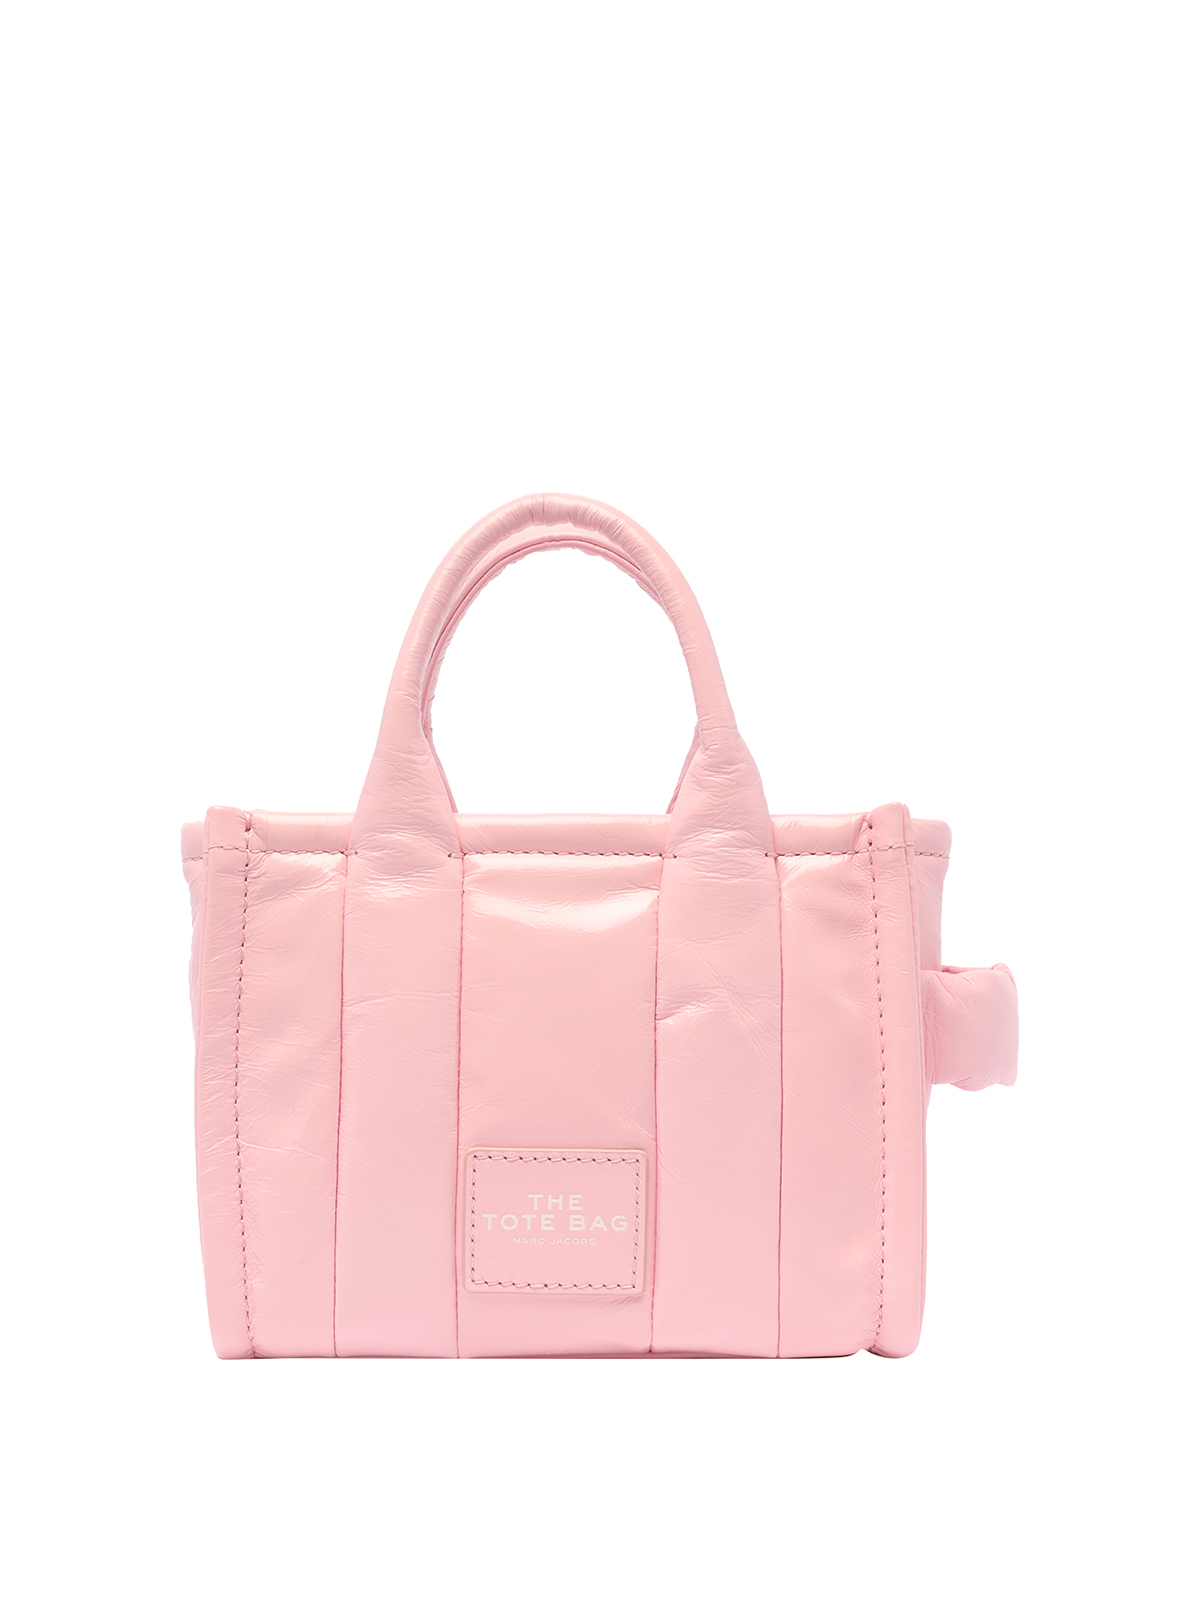 Marc Jacobs The Mini Tote Bag In Nude & Neutrals